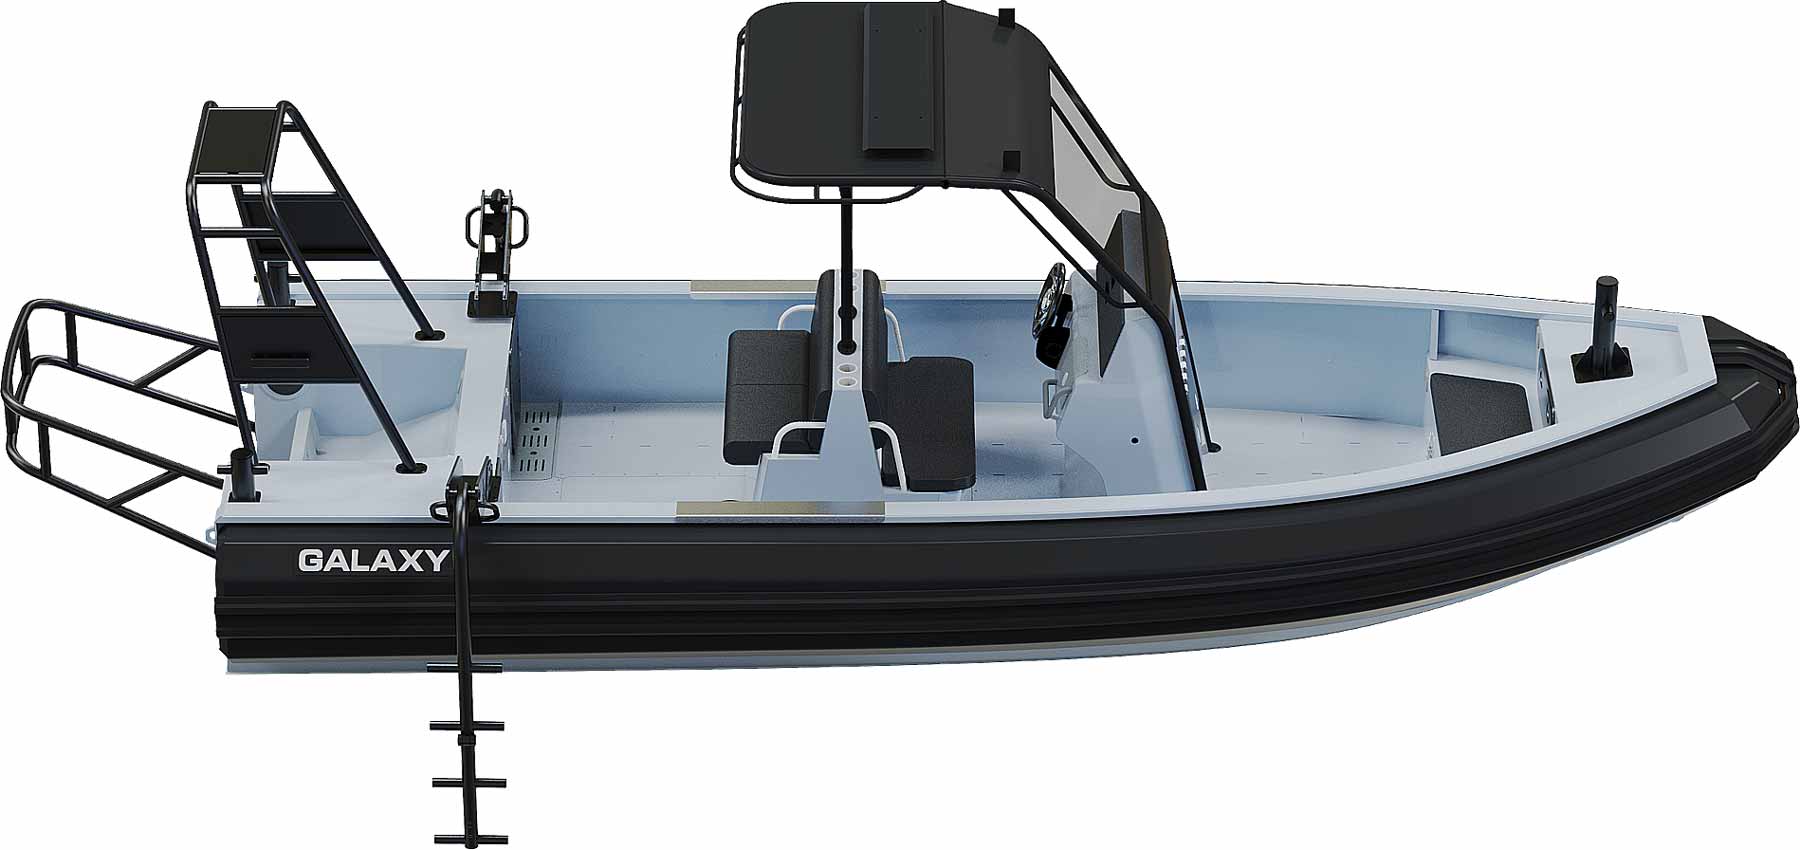 GALAXY Pro aluminum rigid inflatable boat (RIB) for professional applications that is 21’4″ foot long with steering console, seating, storage, hand rails, ladders, and towing arch